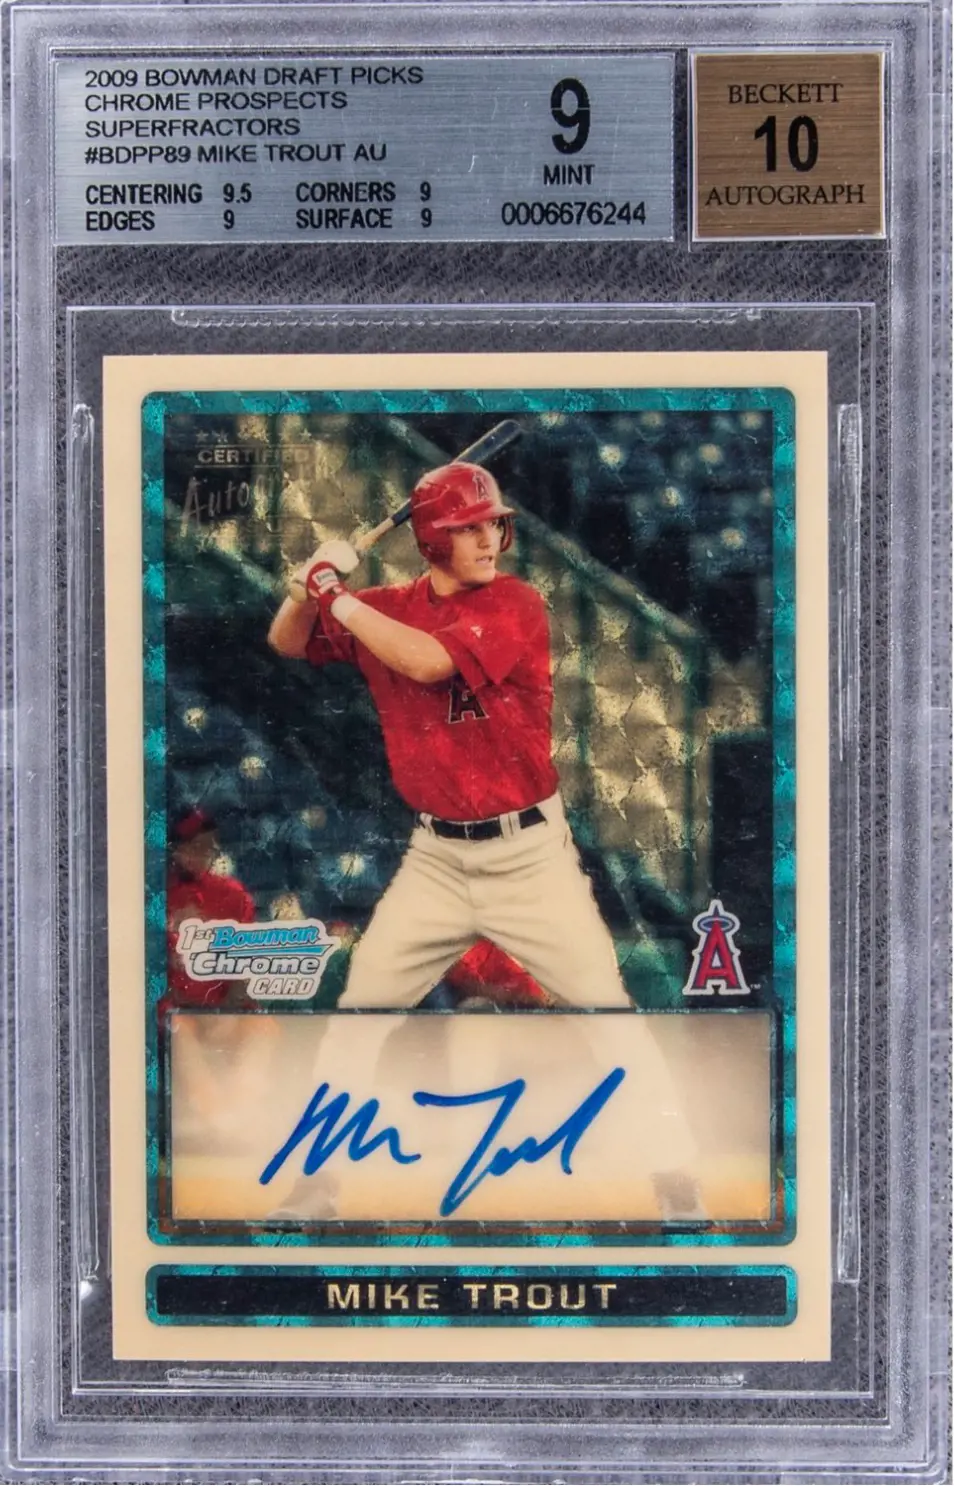 Mike Trout Rookie Card sold by Goldin Auction for almost $4 million.